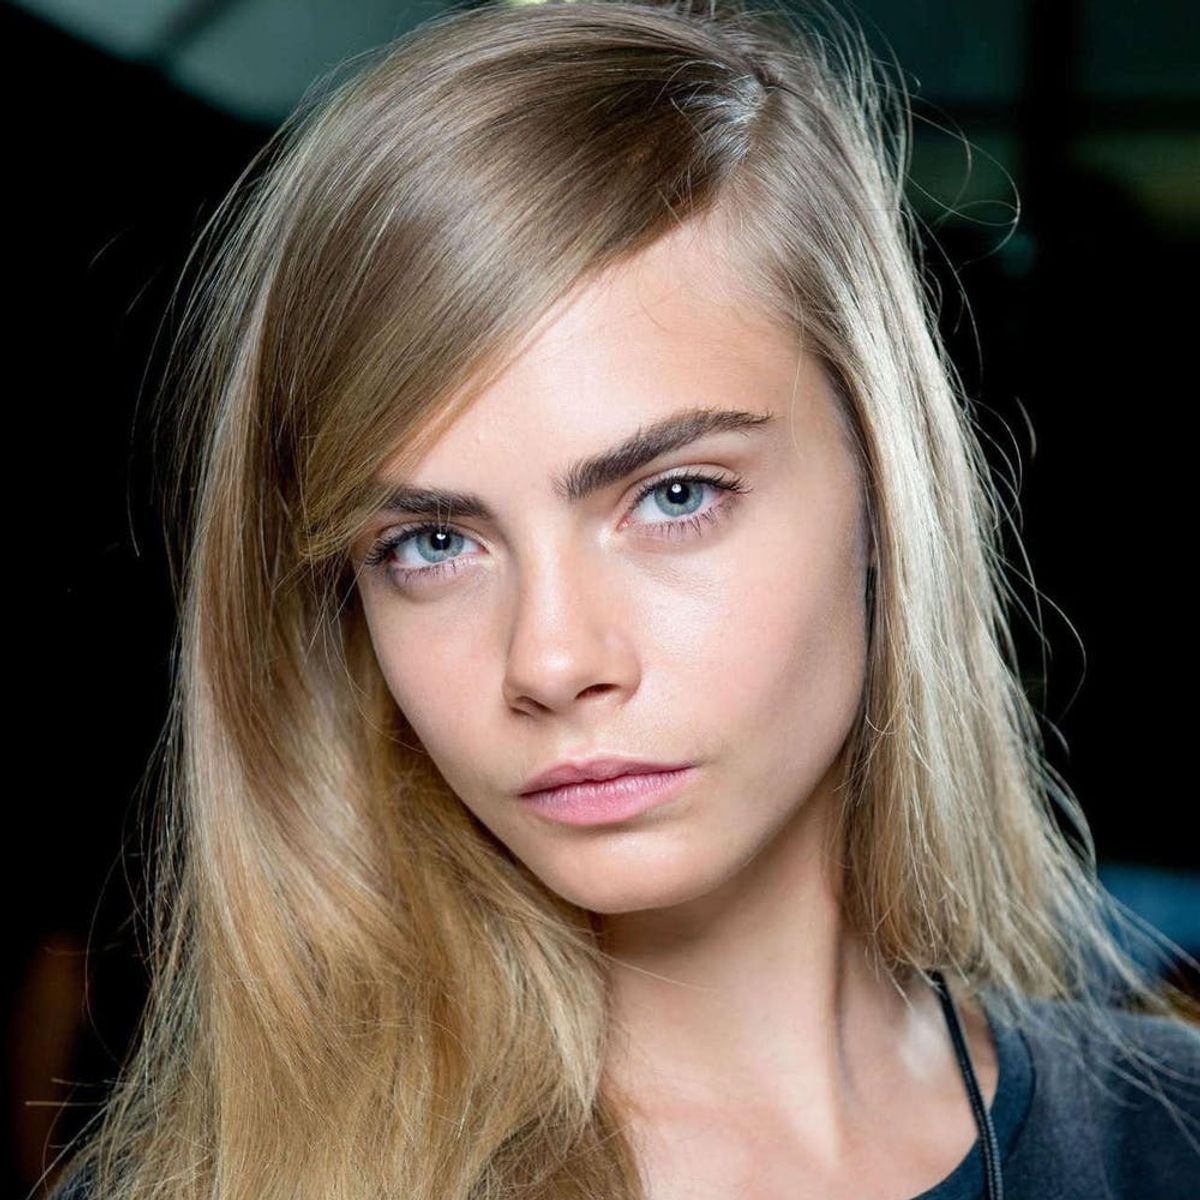 New Year, New ‘Do! 17 Ways to Change Up Your Hair in 2015